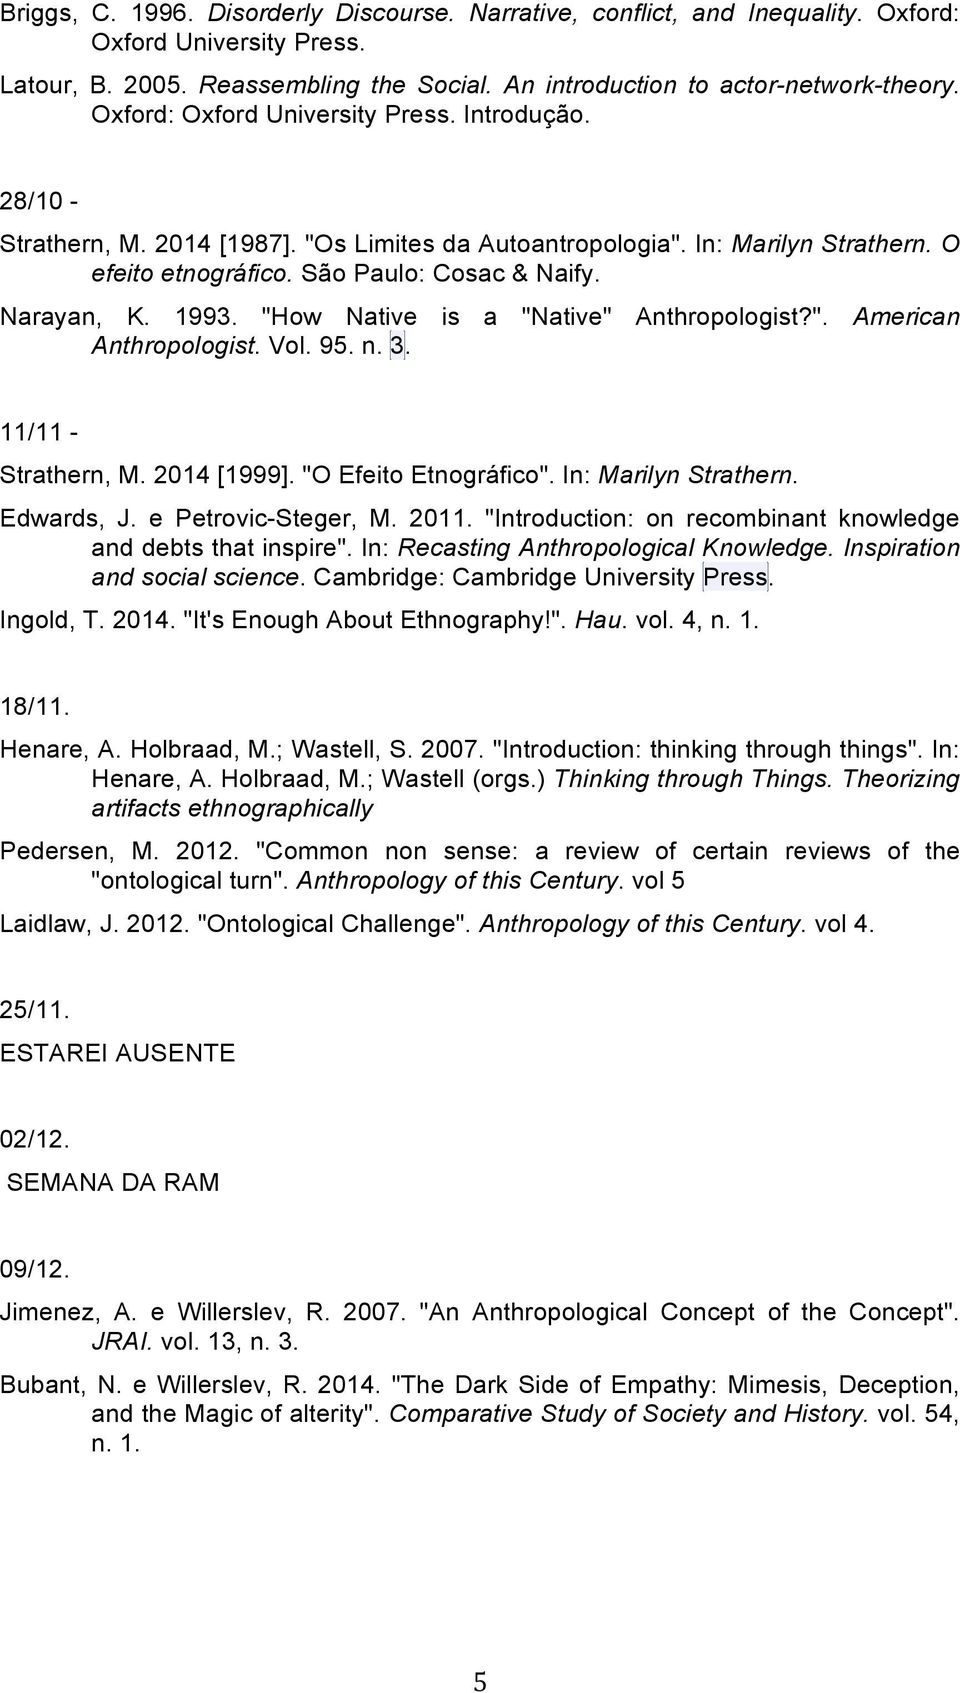 1993. "How Native is a "Native" Anthropologist?". American Anthropologist. Vol. 95. n. 3. 11/11 - Strathern, M. 2014 [1999]. "O Efeito Etnográfico". In: Marilyn Strathern. Edwards, J.